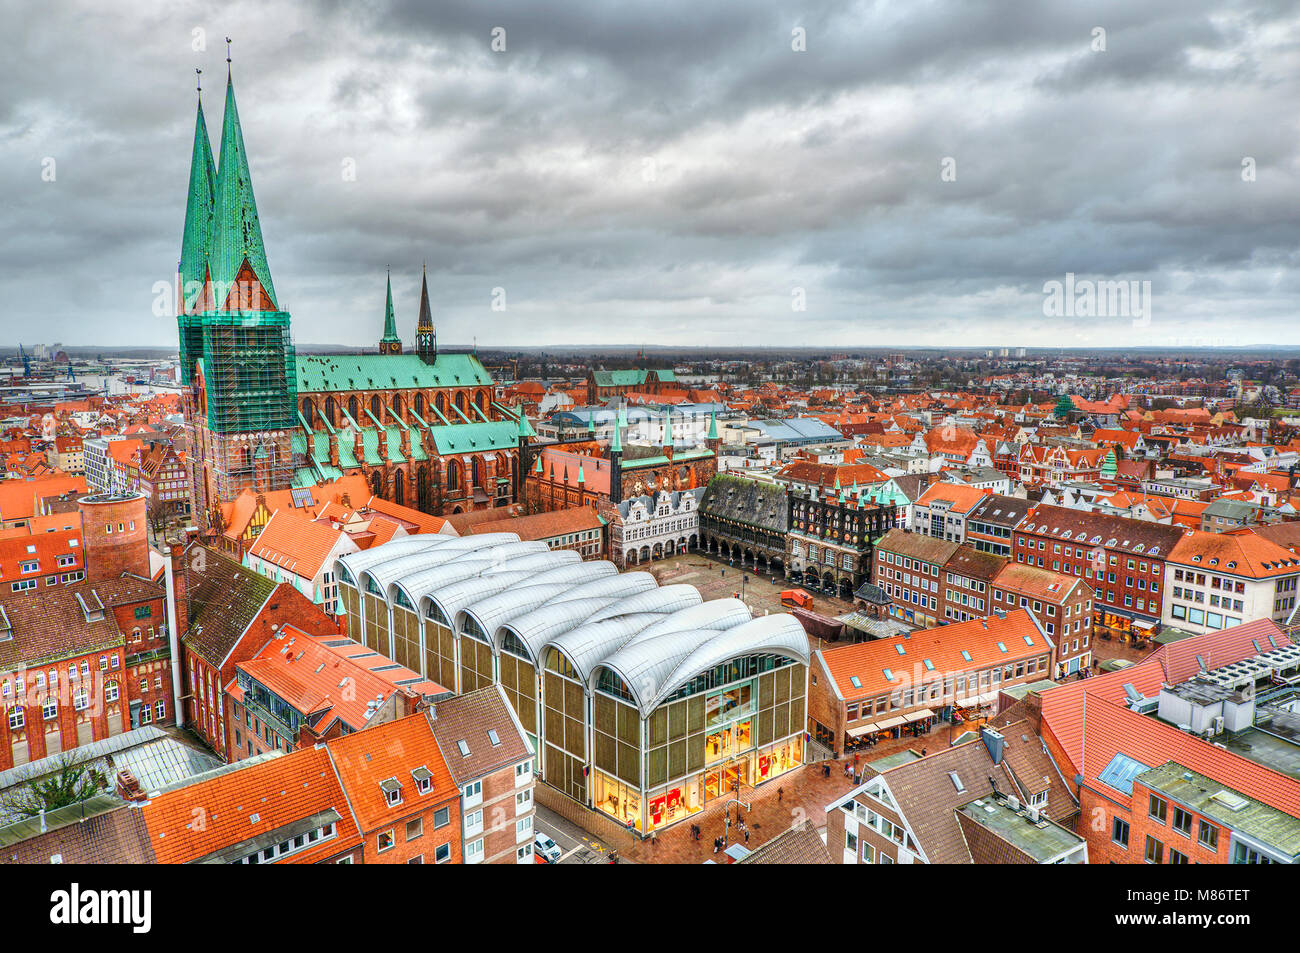 Aerial view of Lubeck, Schleswig-Holstein, Germany Stock Photo